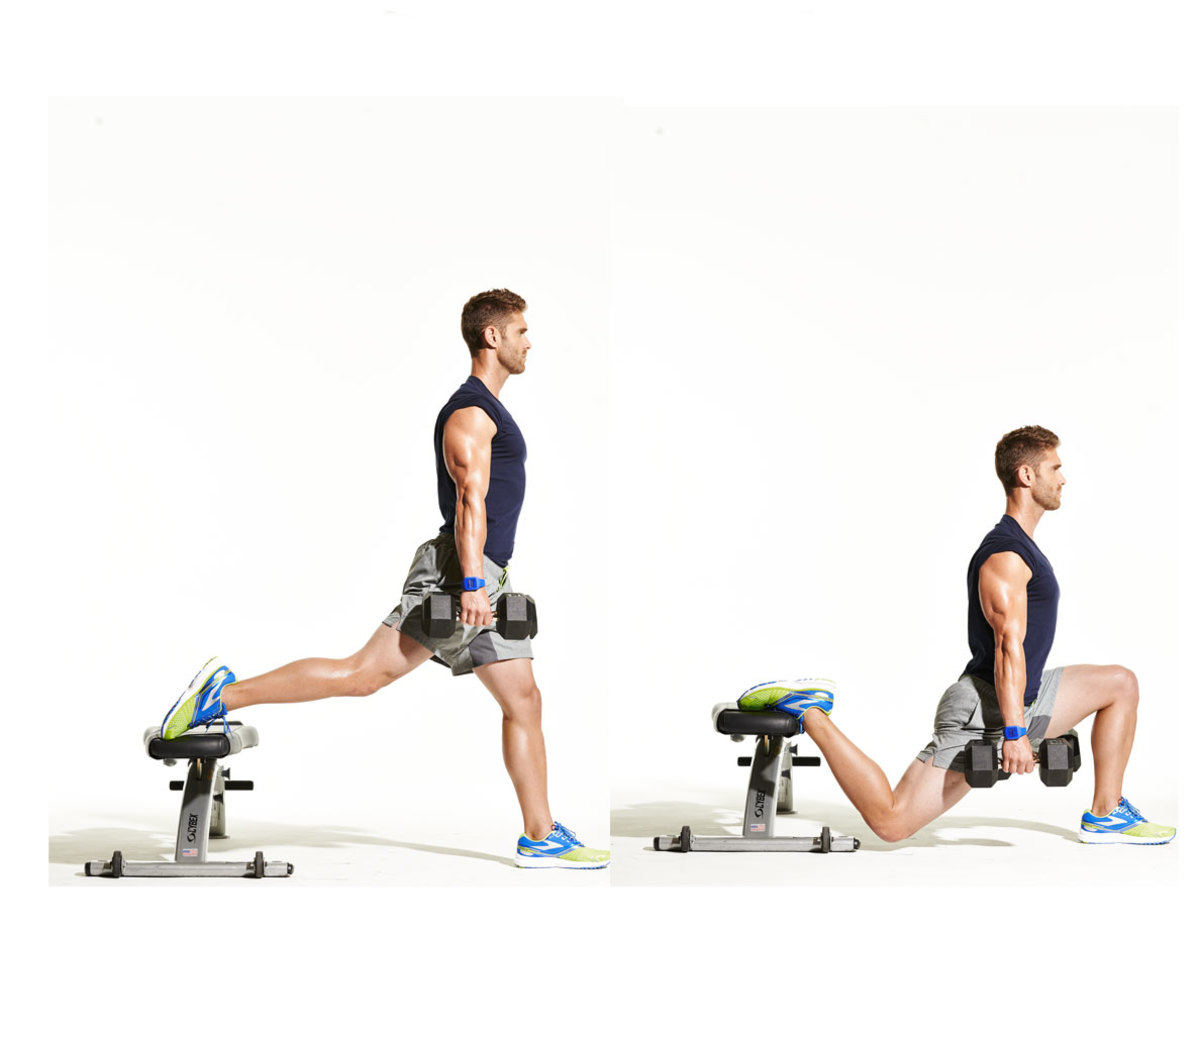 Monday Morning Workout: Get NFL-ready With Circuit Training - Men's Journal